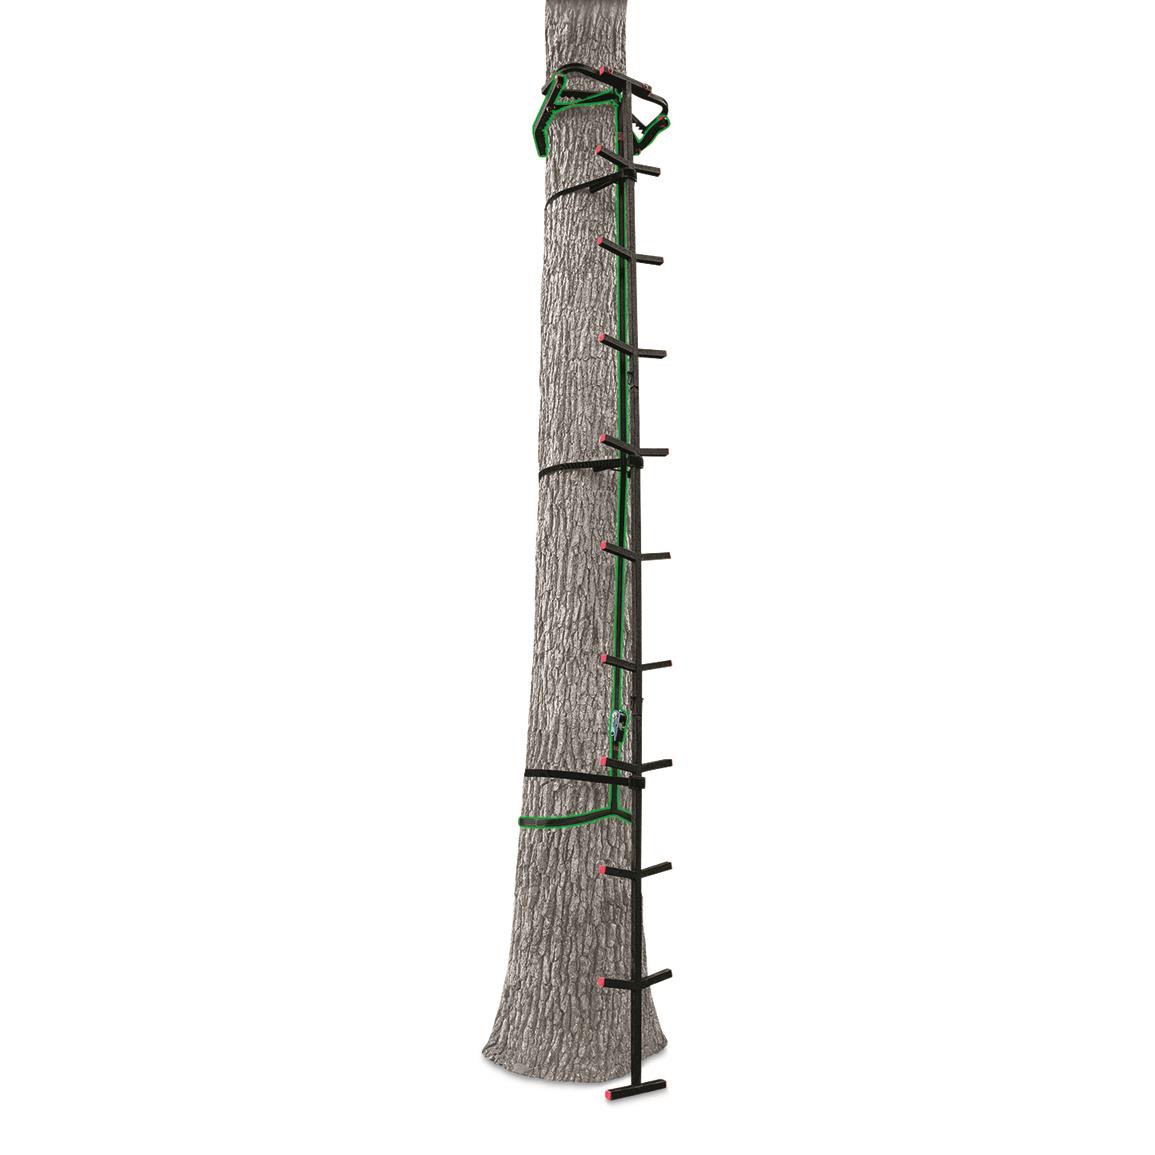 Primal Tree Stands 20’ Grip Stick with Grip Jaw System Climbing Sticks